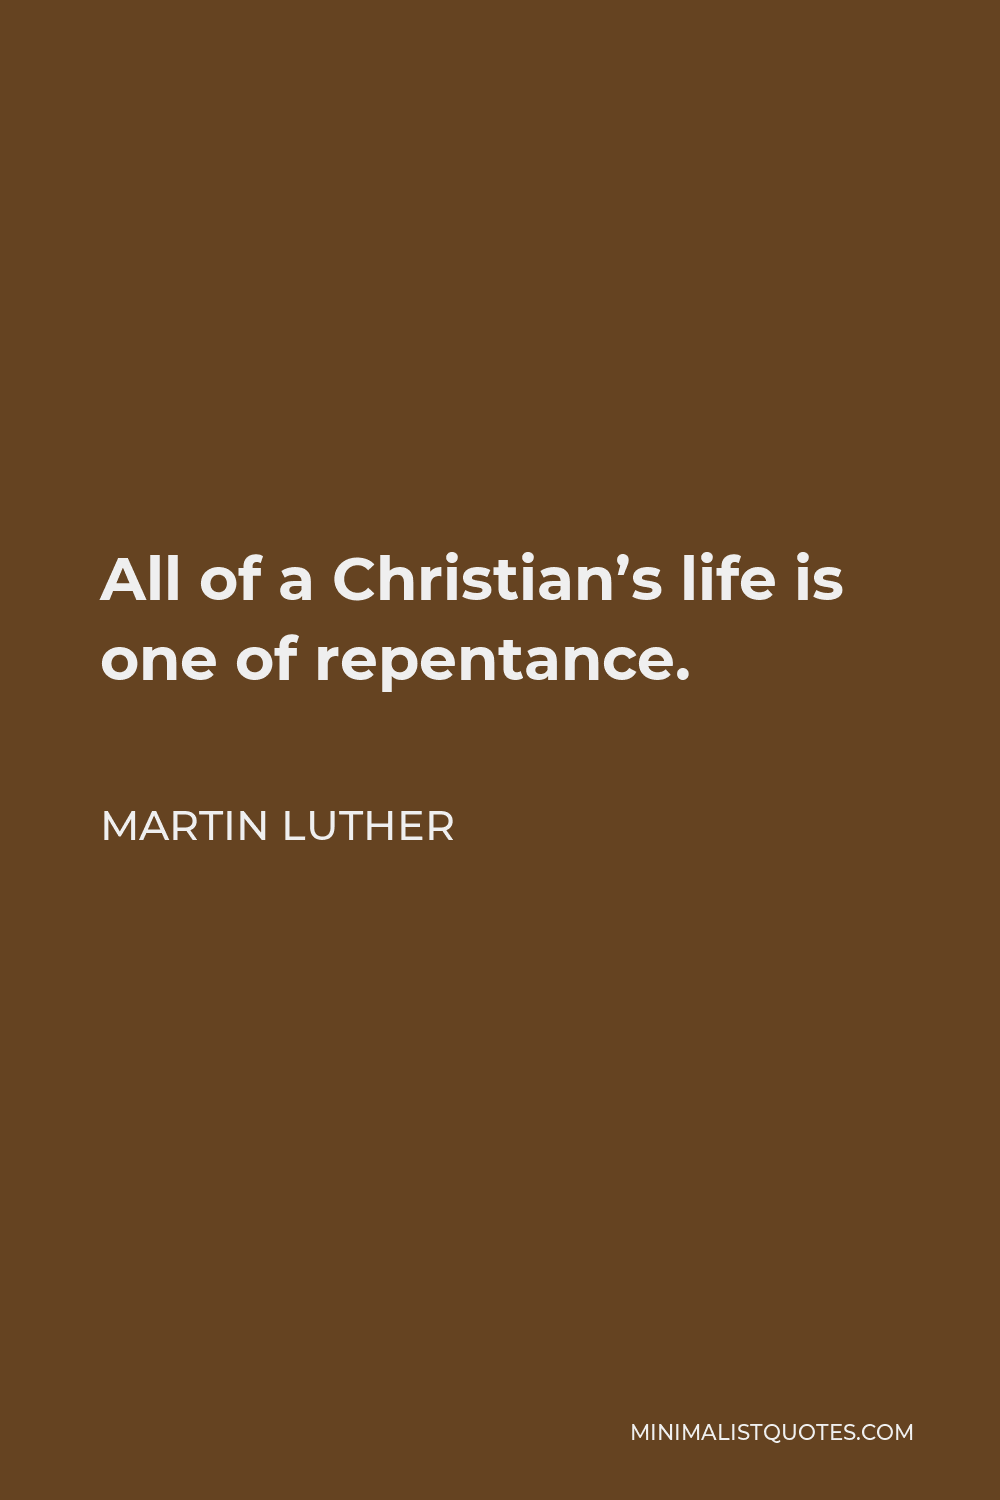 Martin Luther Quote - All of a Christian’s life is one of repentance.